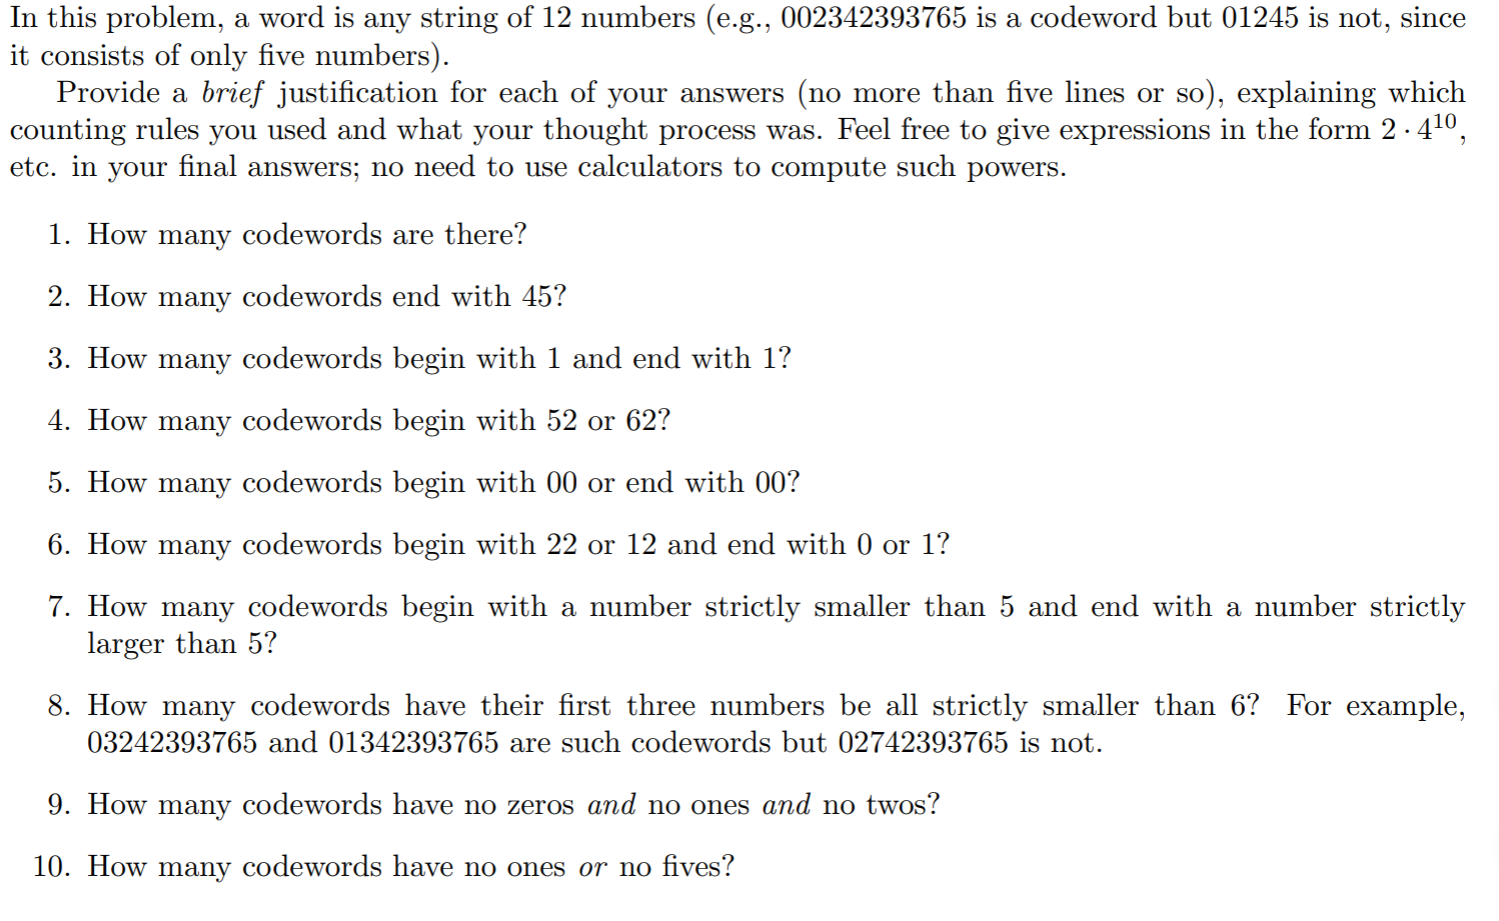 In this problem, a word is any string of 12 numbers (e.g., 002342393765 is a codeword but 01245 is not, since
it consists of only five numbers).
Provide a brief justification for each of your answers (no more than five lines or so), explaining which
counting rules you used and what your thought process was. Feel free to give expressions in the form 2·410,
etc. in your final answers; no need to use calculators to compute such powers.
1. How many codewords are there?
2. How many codewords end with 45?
3. How many codewords begin with 1 and end with 1?
4. How many codewords begin with 52 or 62?
5. How many codewords begin with 00 or end with 00?
6. How many codewords begin with 22 or 12 and end with 0 or 1?
7. How many codewords begin with a number strictly smaller than 5 and end with a number strictly
larger than 5?
8. How many codewords have their first three numbers be all strictly smaller than 6? For example,
03242393765 and 01342393765 are such codewords but 02742393765 is not.
9. How many codewords have no zeros and no ones and no twos?
10. How many codewords have no ones or no fives?
